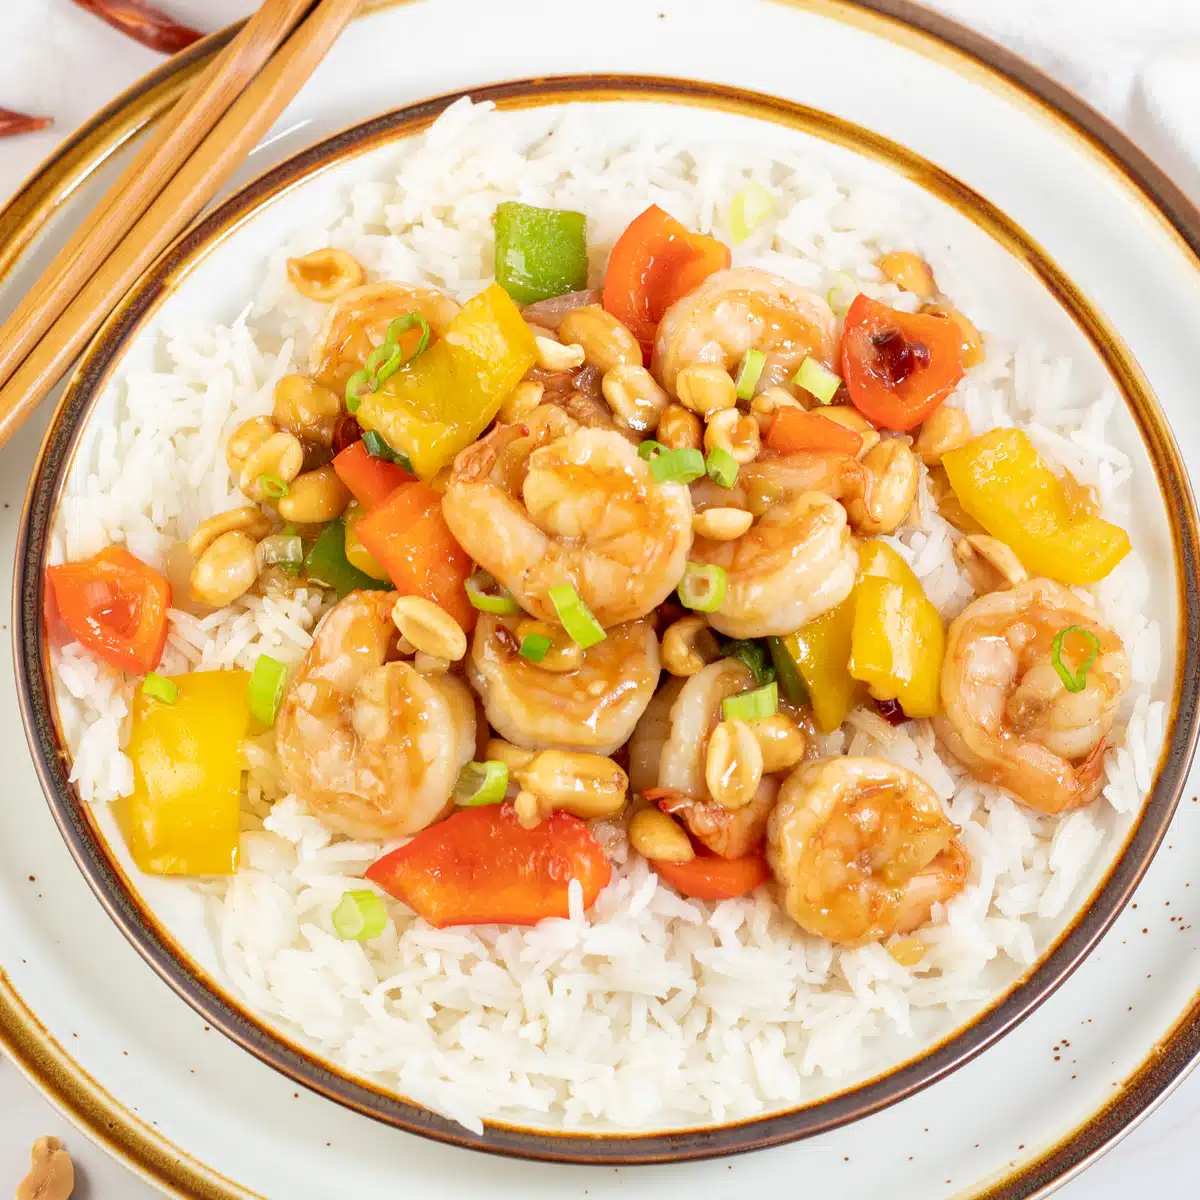 Square image of kung pao shrimp on a plate with white rice.